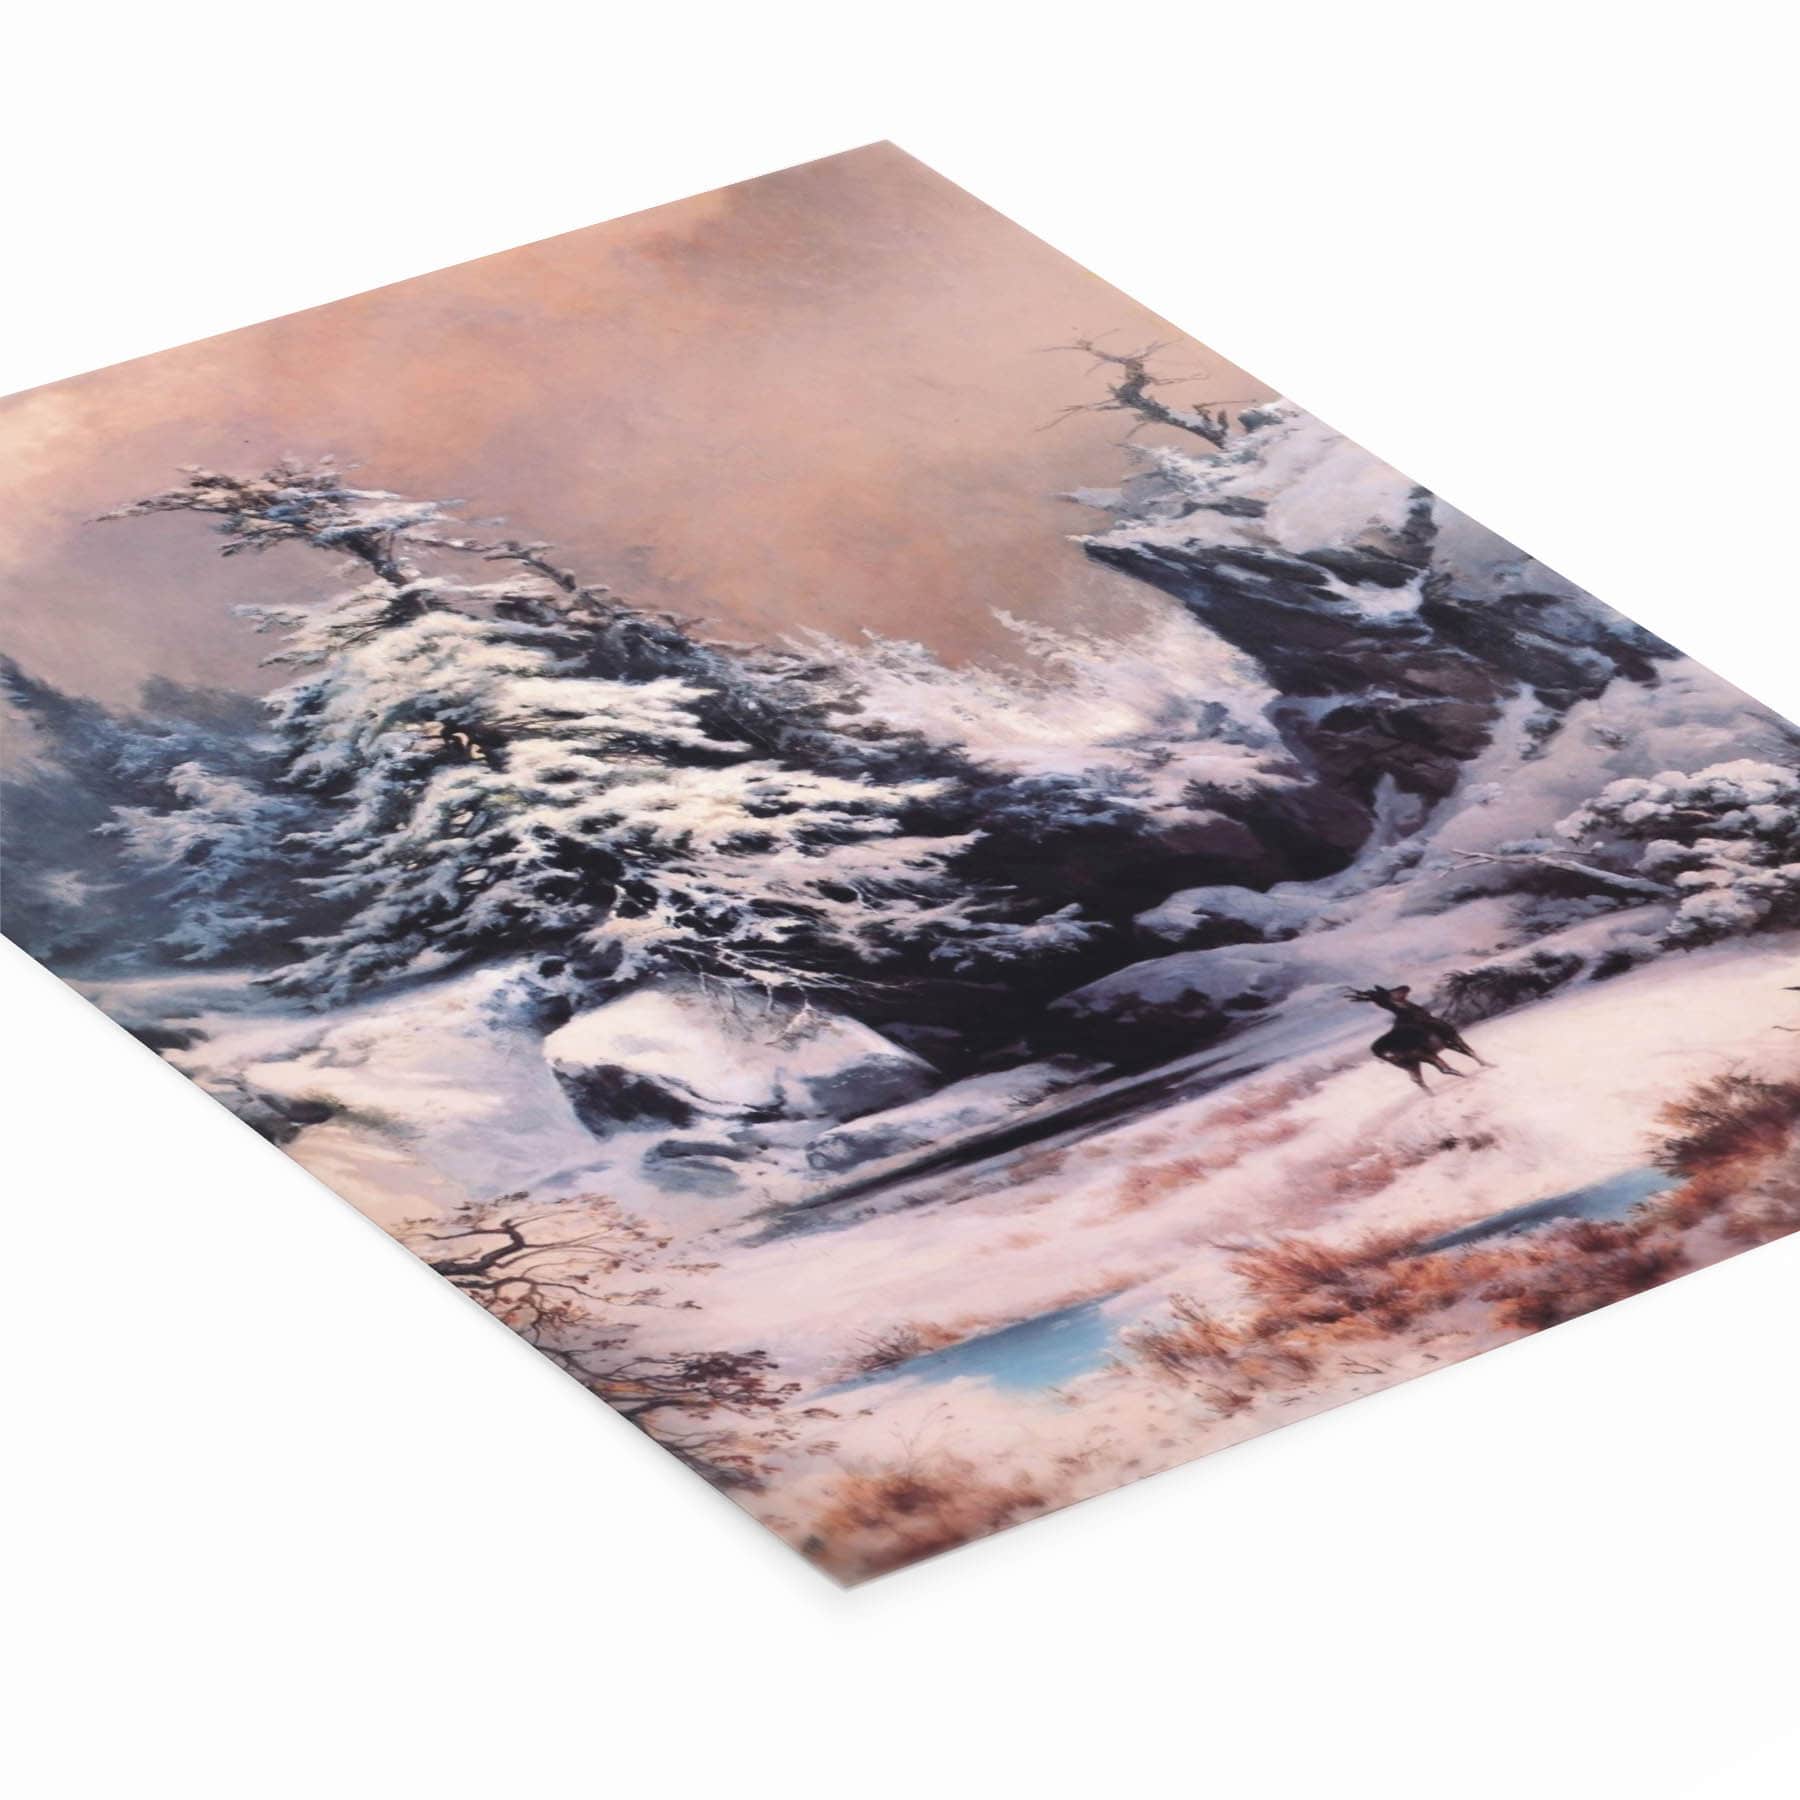 Forest Covered in Snow Painting Laying Flat on a White Background